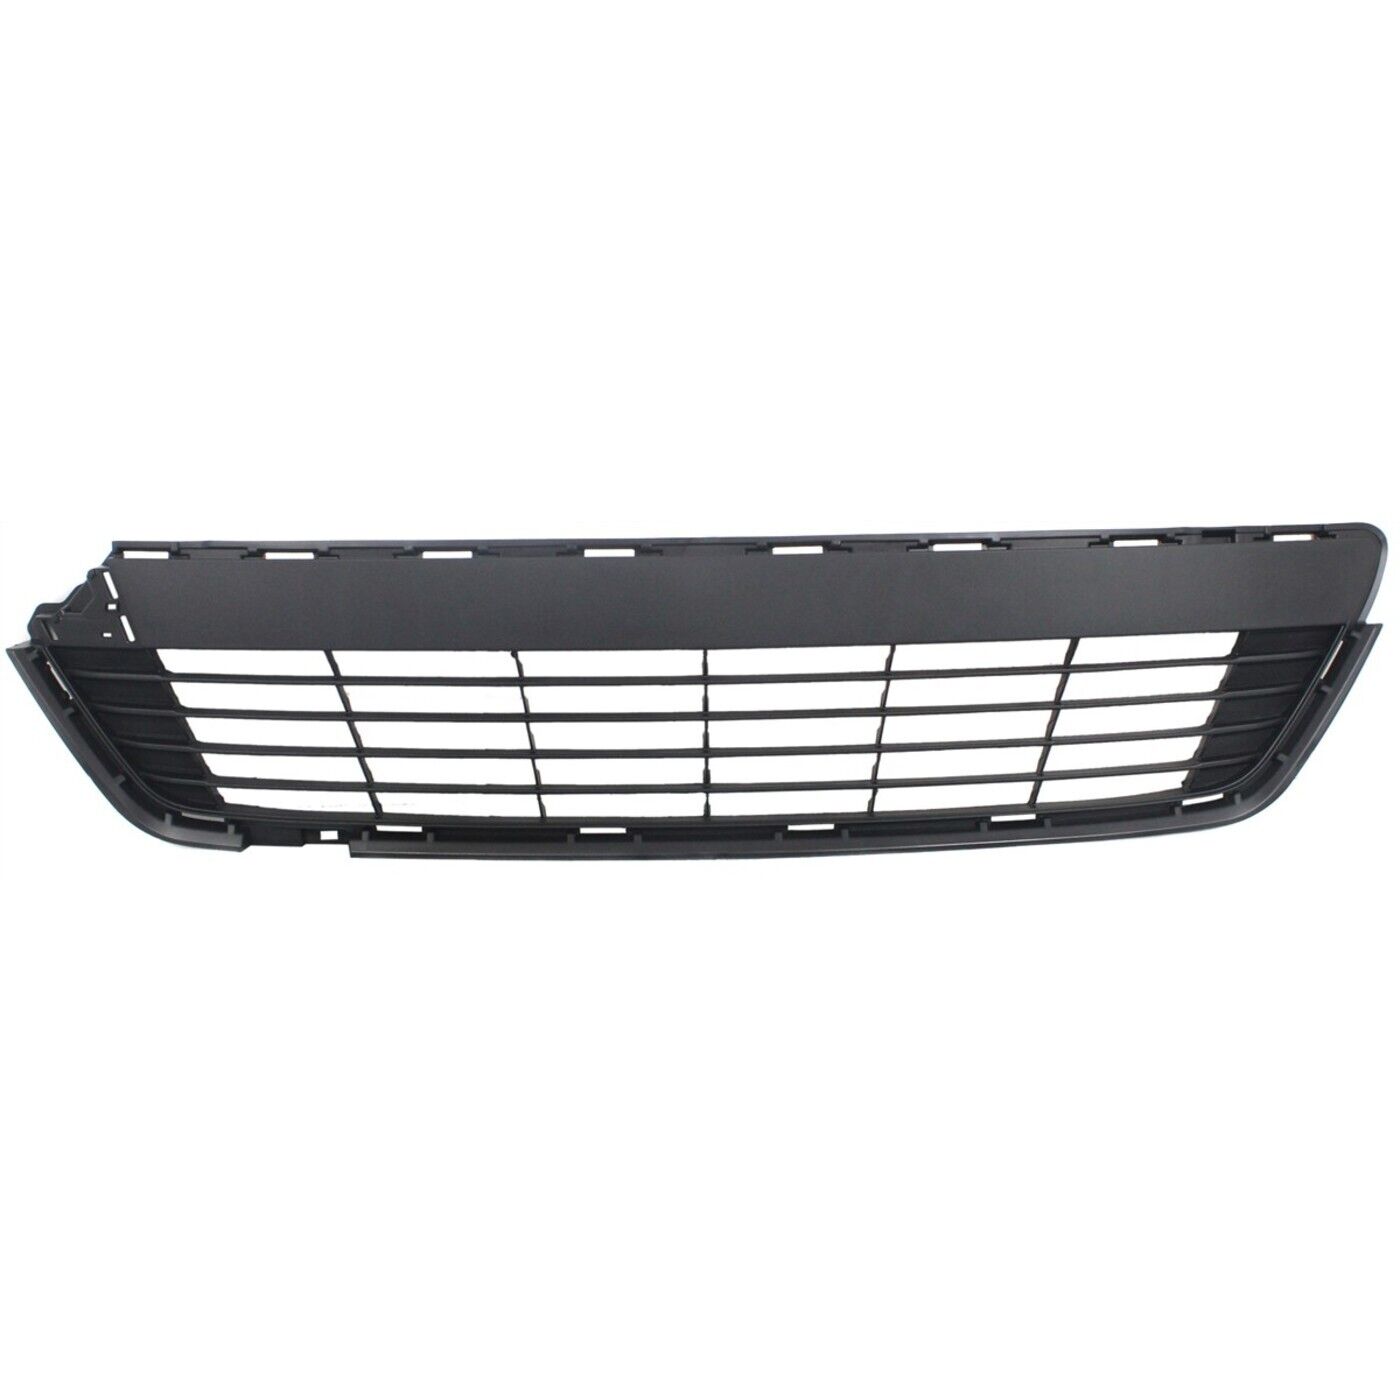 Bumper Grille For 2012-2014 Toyota Yaris Center Textured Black Plastic